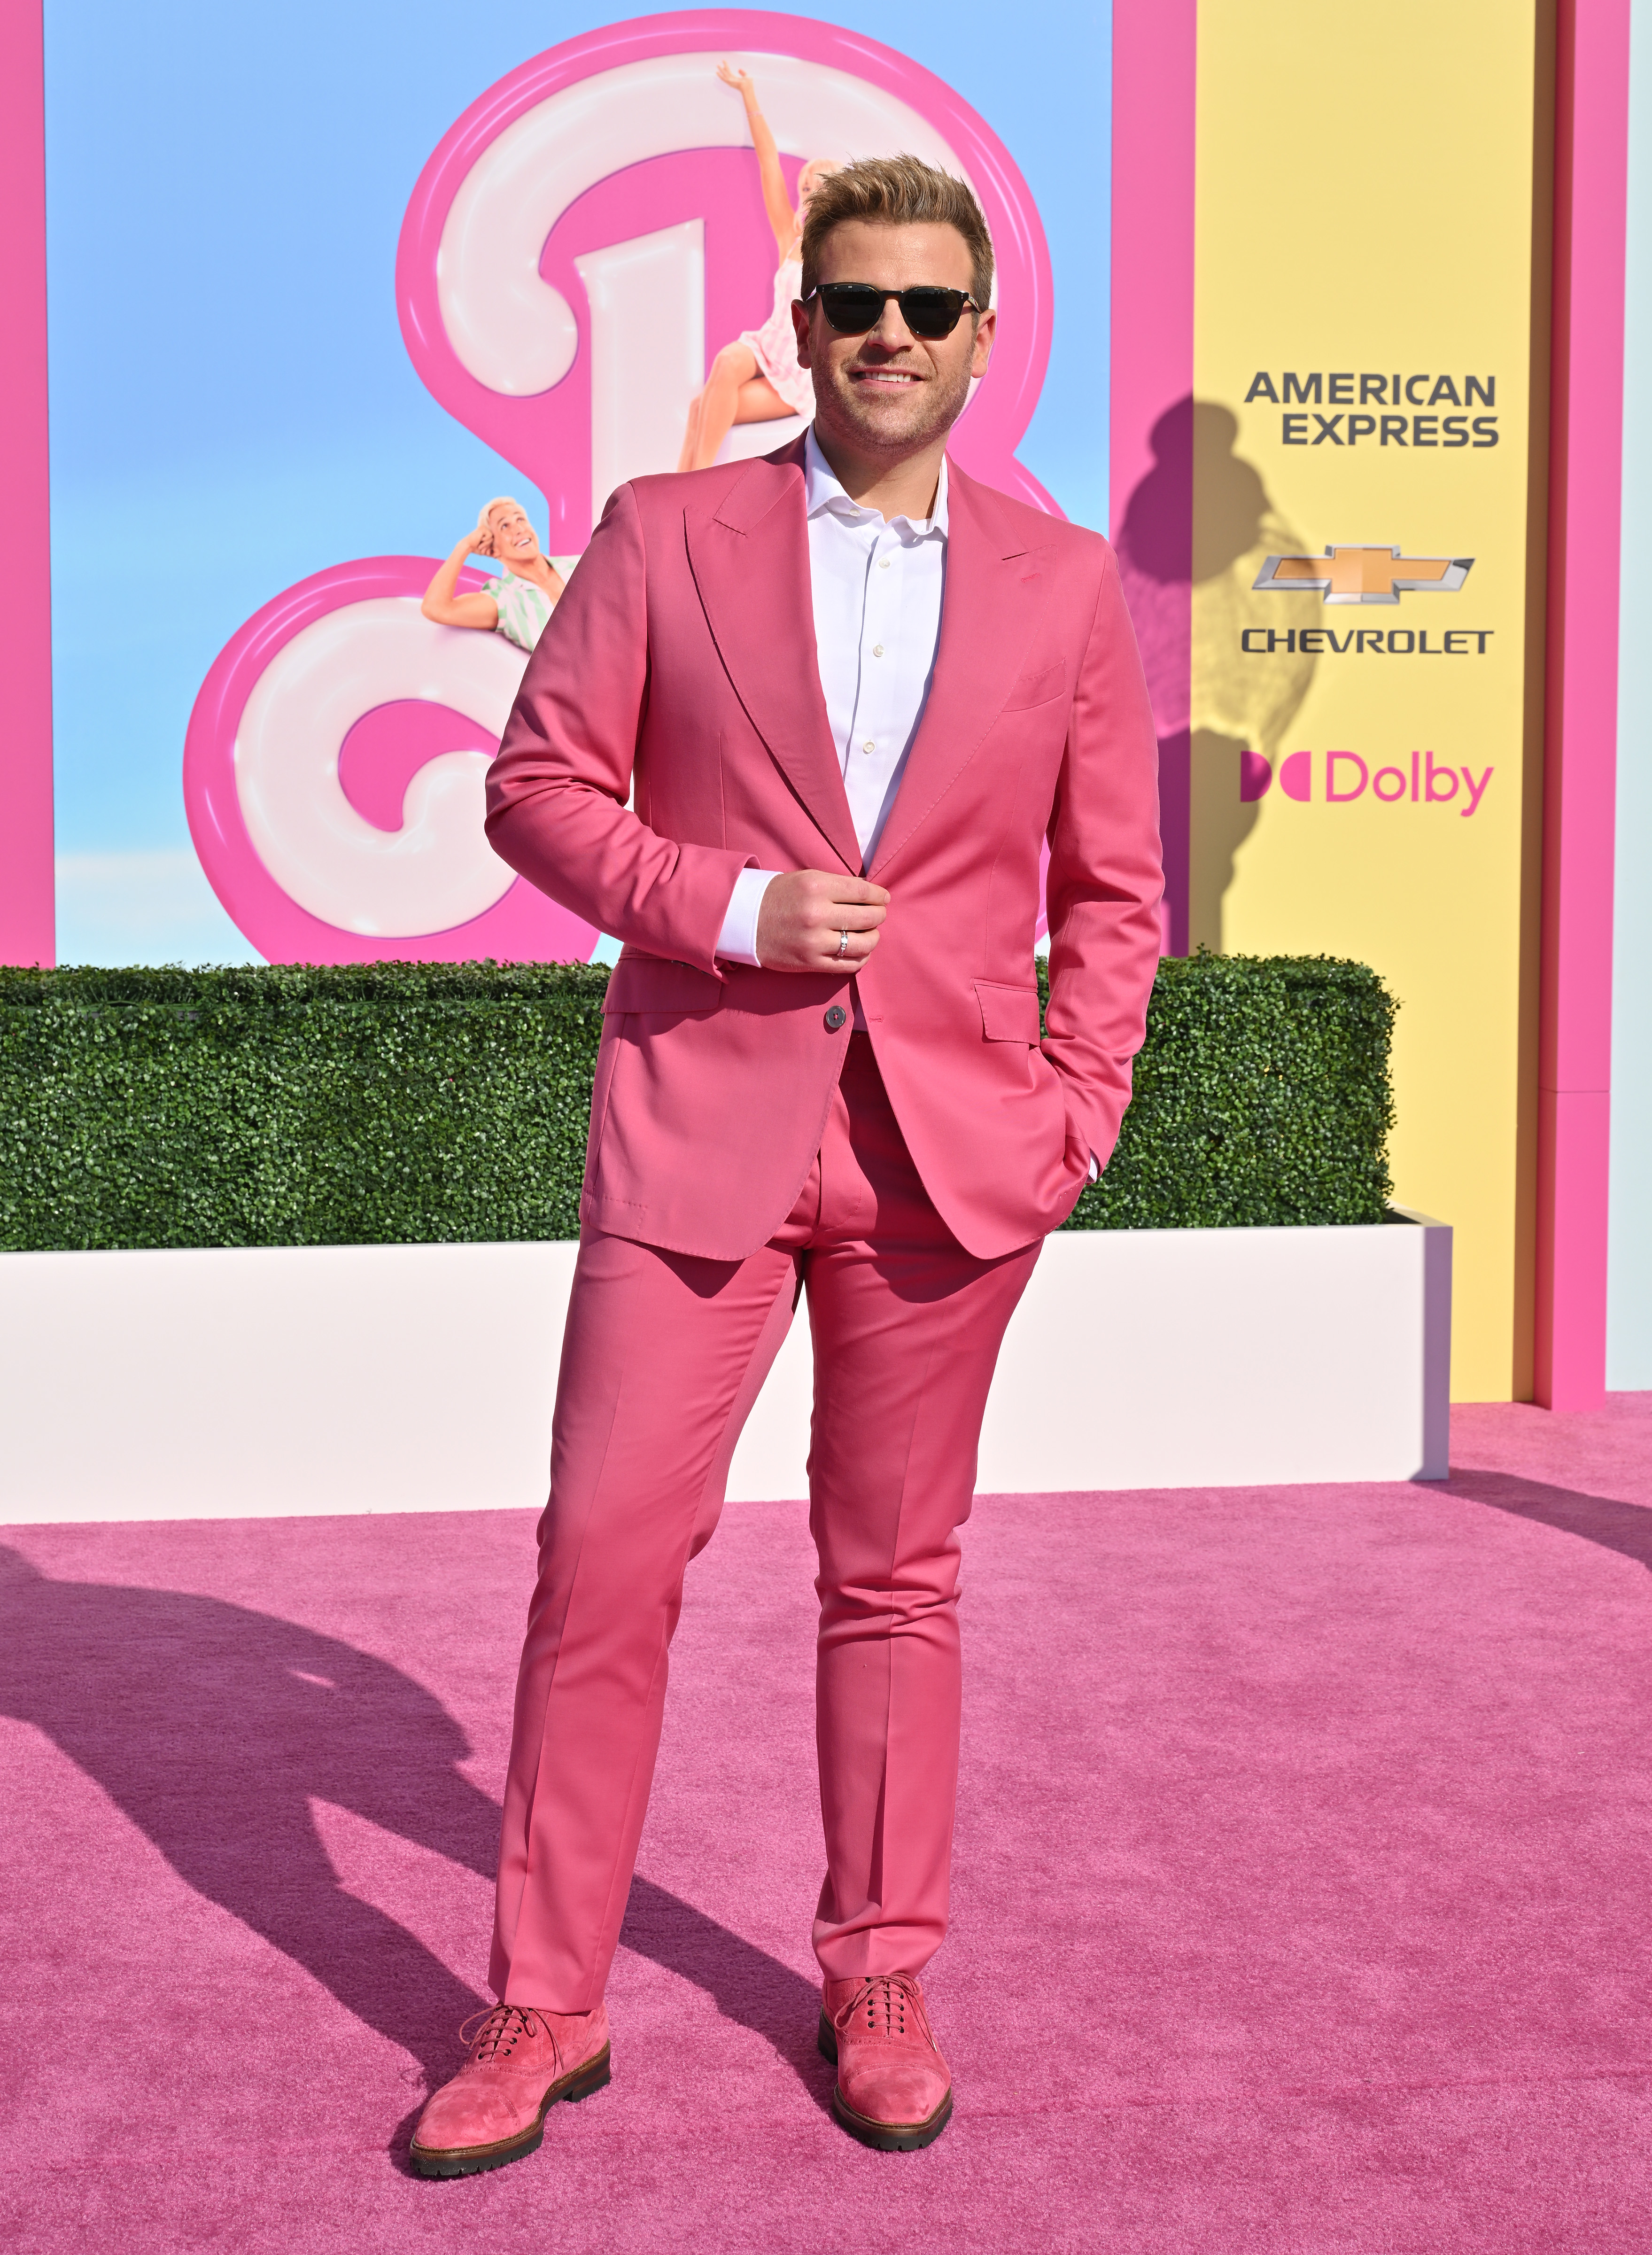 In a pink suit